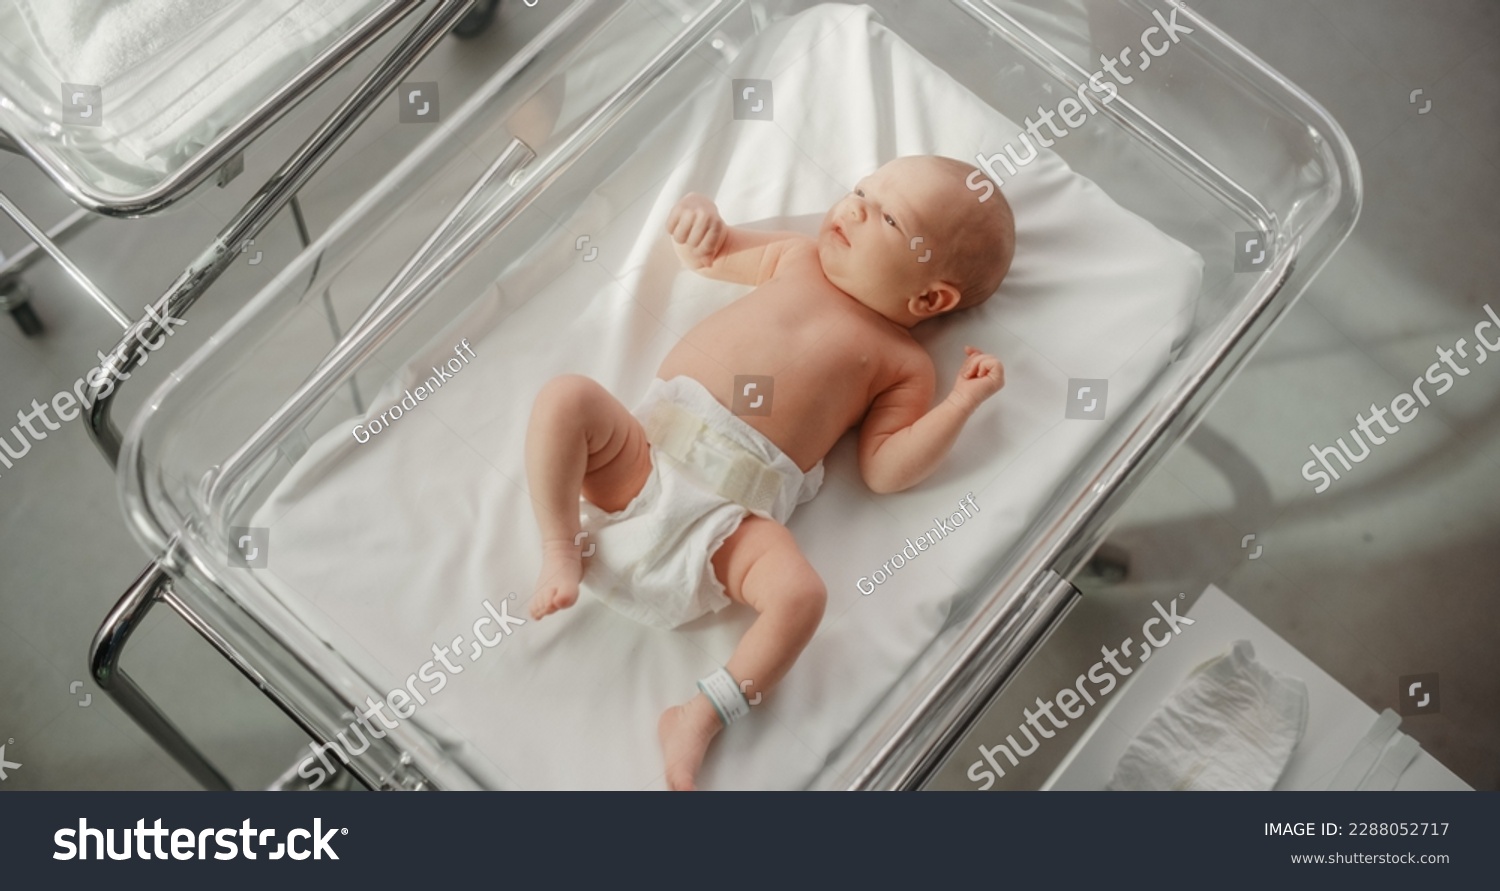 Adorable Caucasian Newborn Child Lying in Hospital Bed in a Nursery Clinic. Little Playful and Healthy Baby. Medical Health Care, Maternity and Parenthood Concept #2288052717